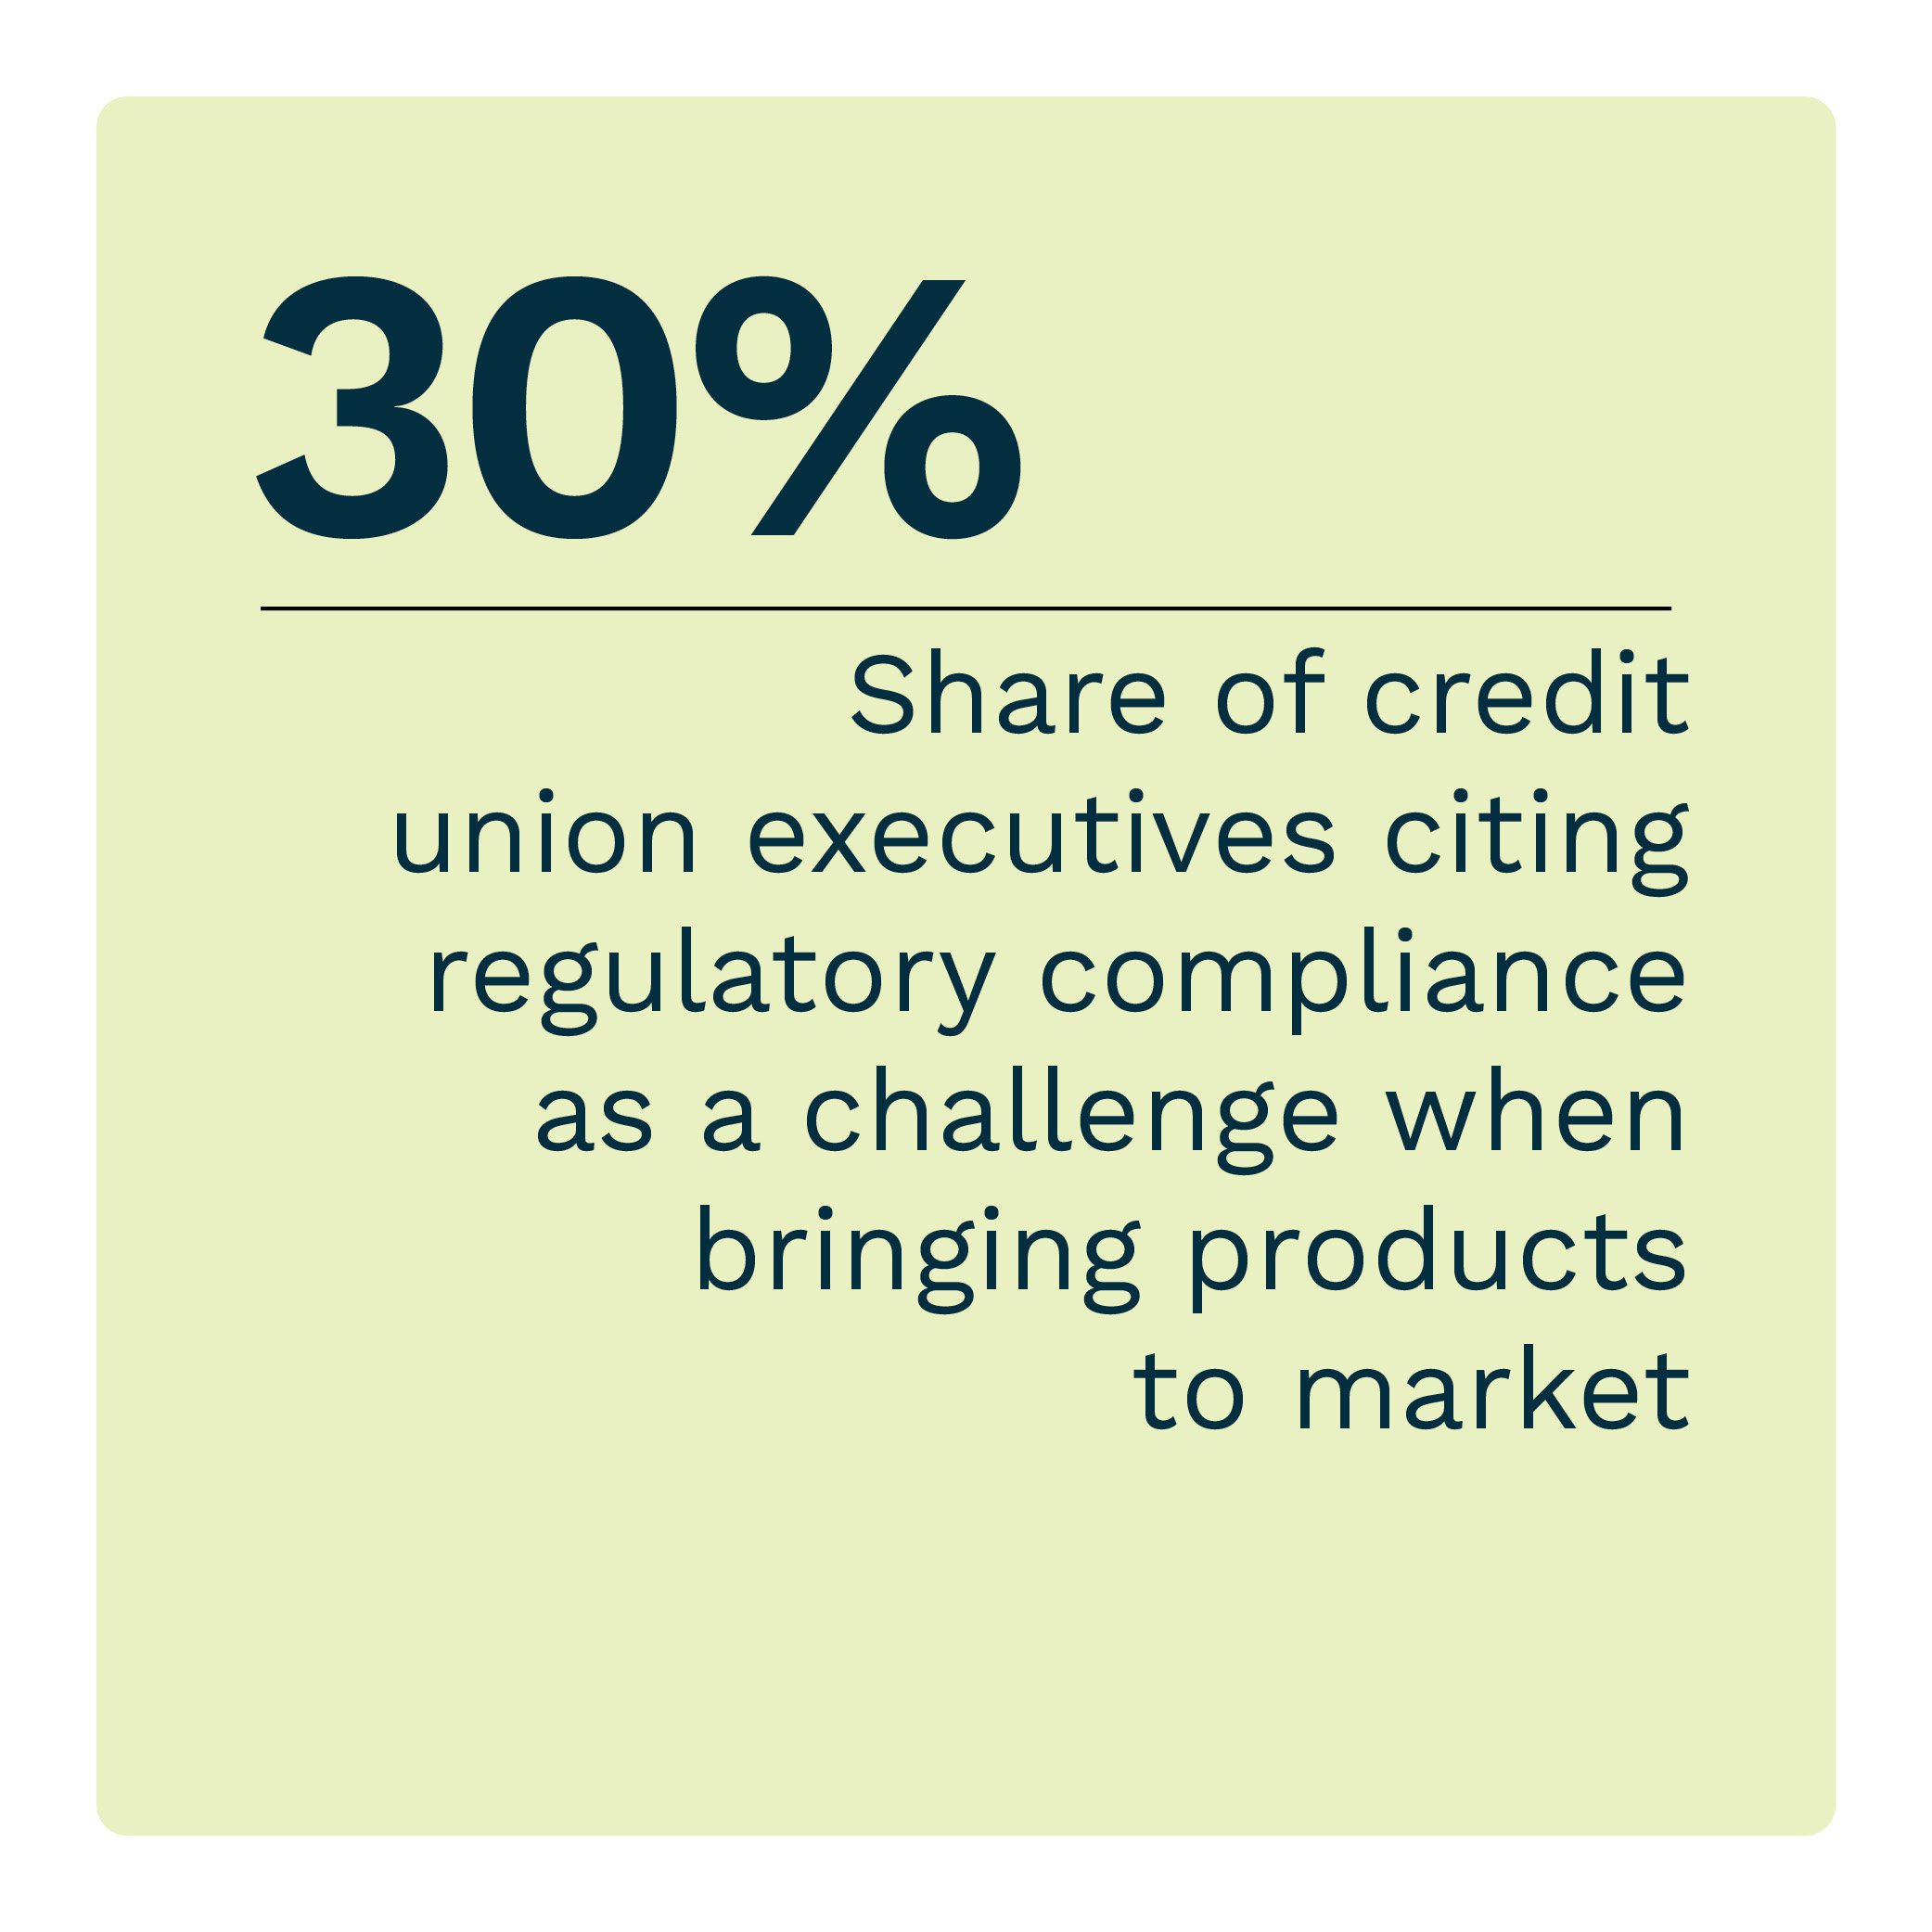 30%: Share of CU executives citing regulatory compliance as a challenge when bringing products to market